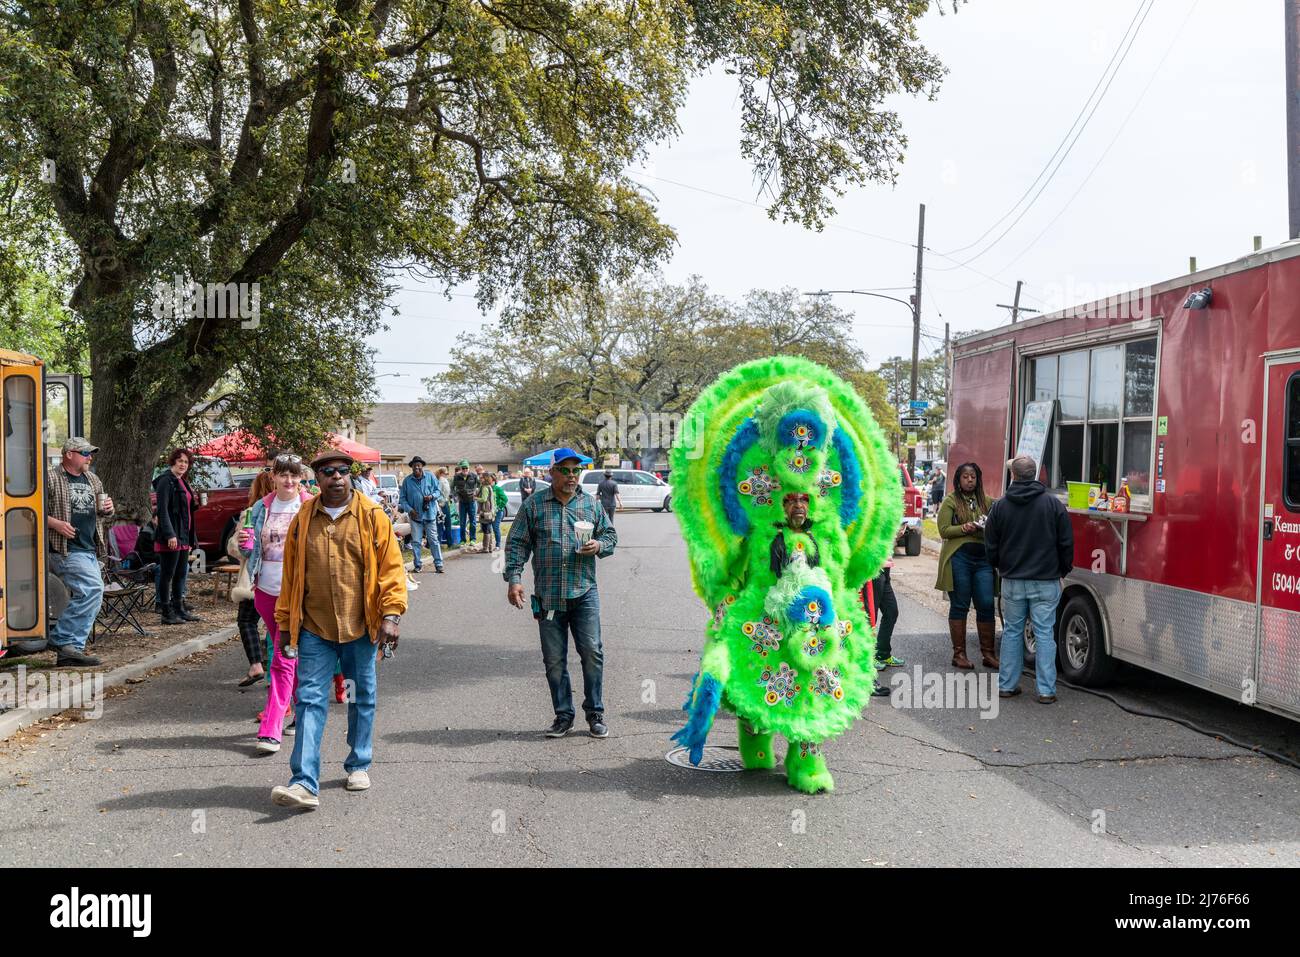 NEW ORLEANS, LA, USA - MARCH 17, 2019: People, including a Mardi Gras Indian, walking past a food truck on LaSalle Street on Super Sunday Stock Photo